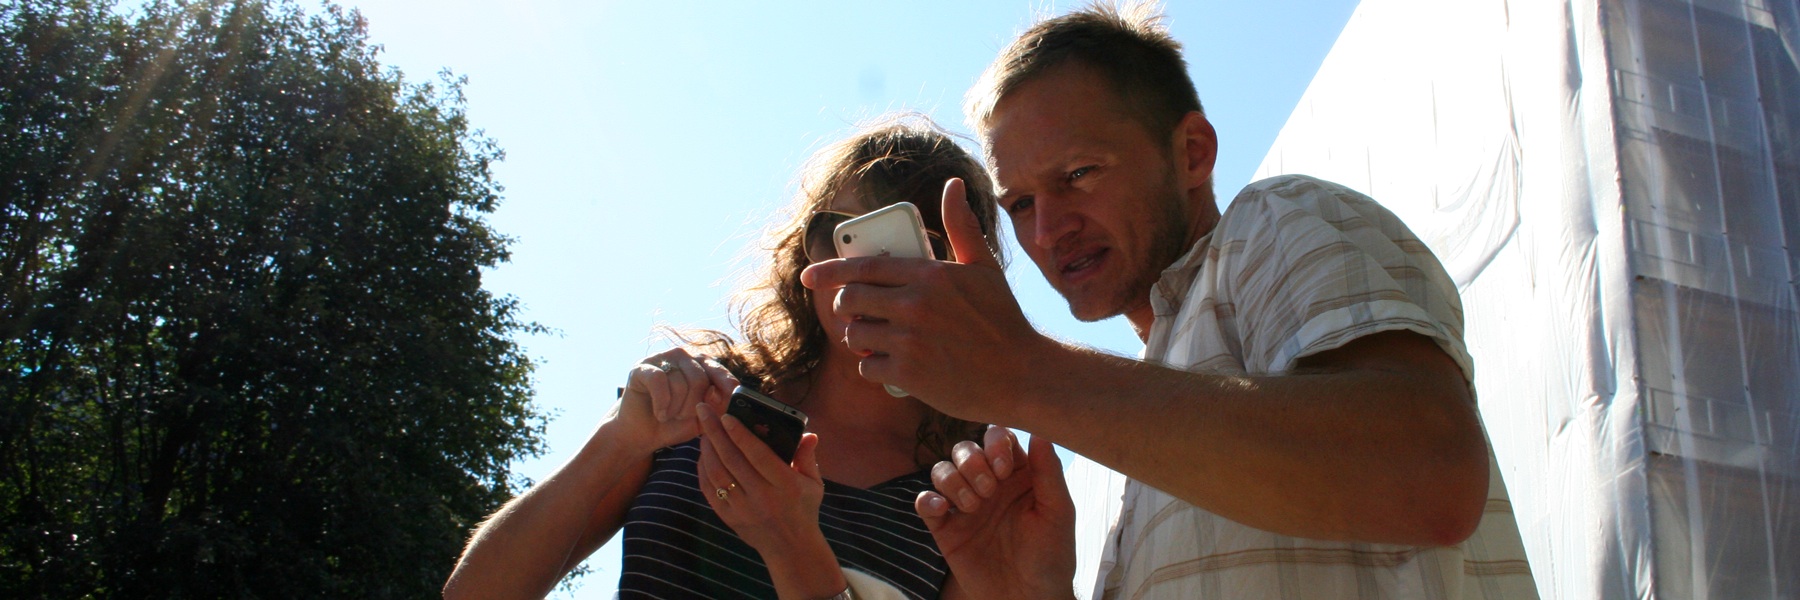 Two people looking at a mobile phone